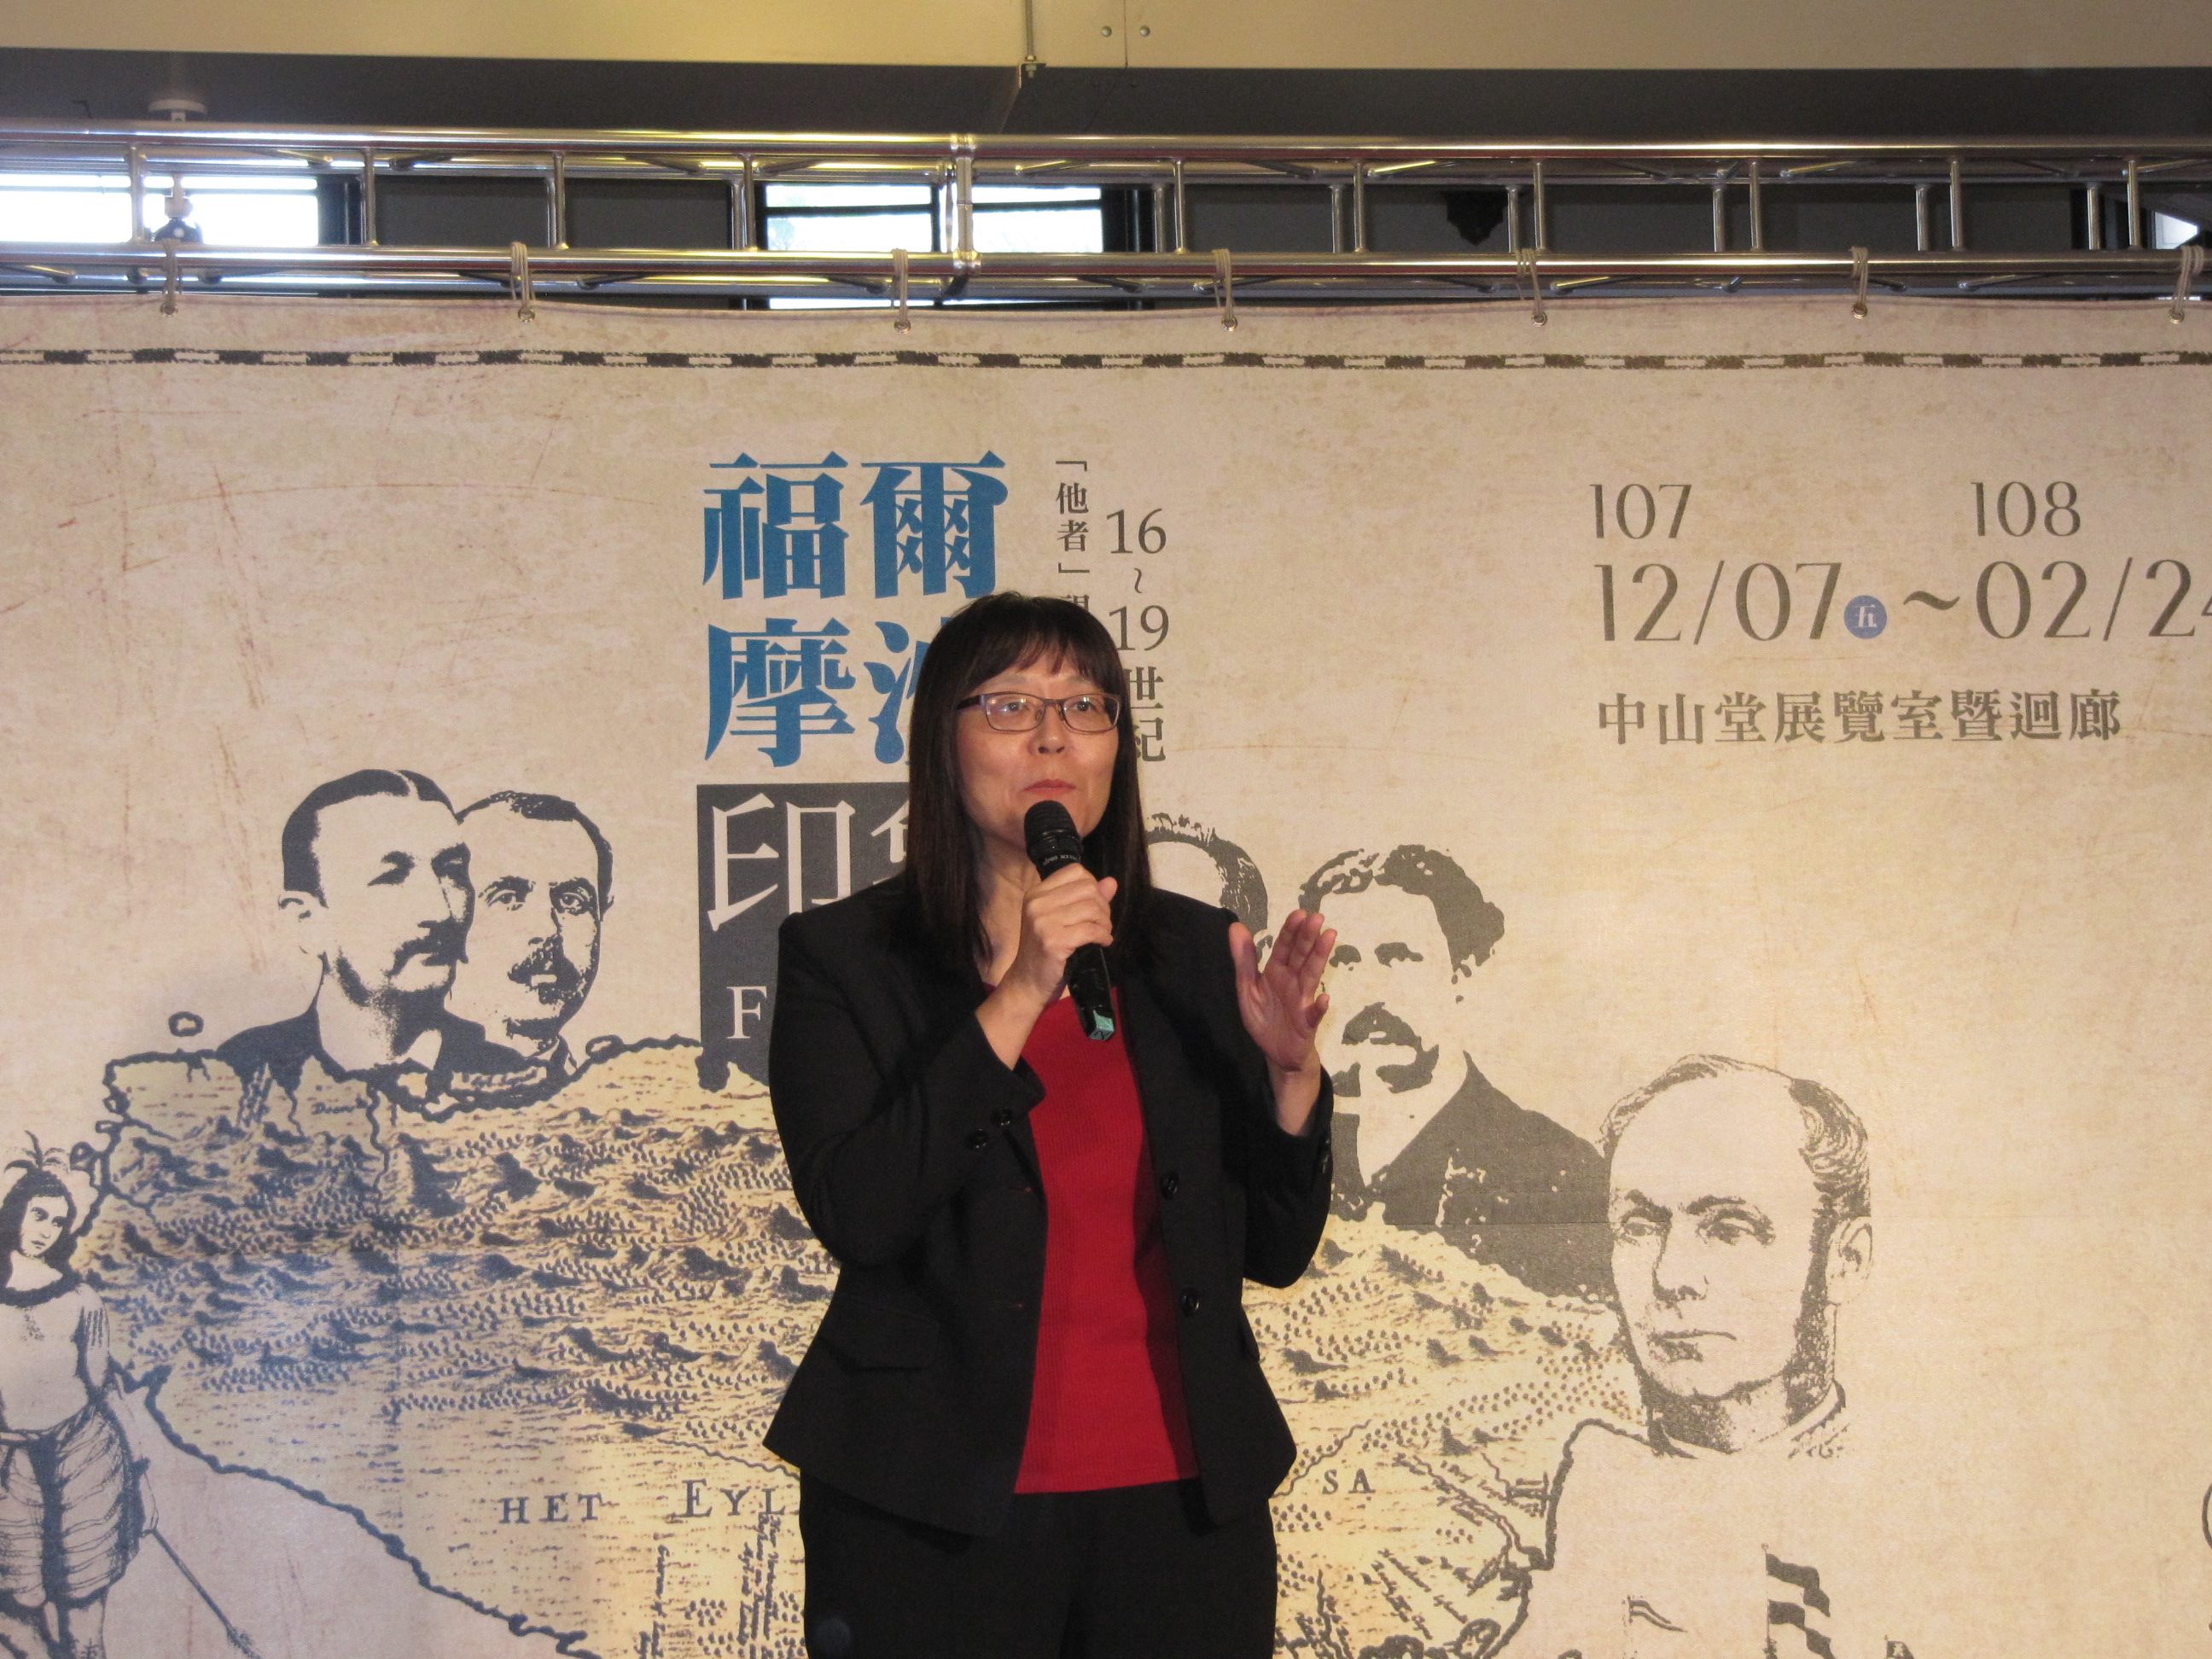 DOCA Deputy Commissioner Lee Li Zhu (李麗珠) welcomes guests to the exhibition